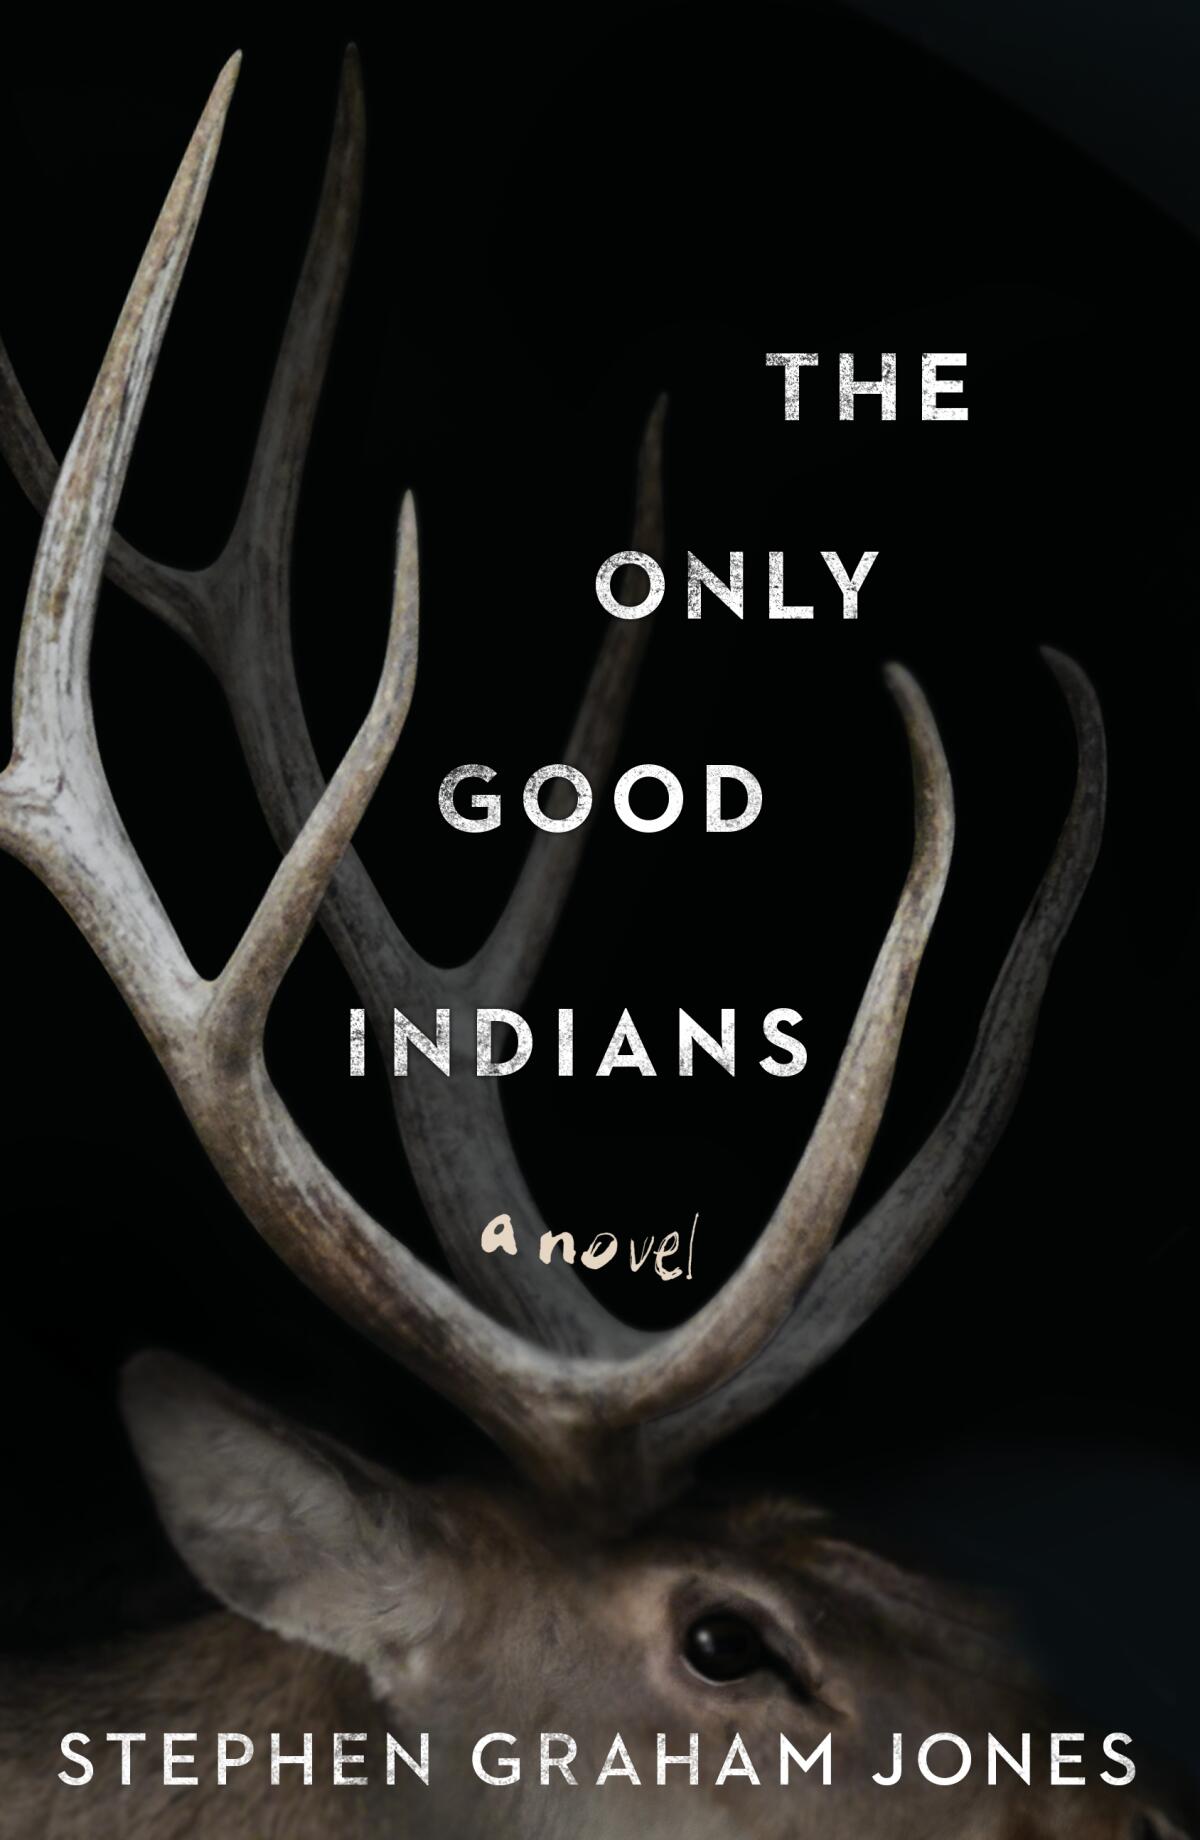 Book jacket for "The Only Good Indians" by author Stephen Graham Jones.